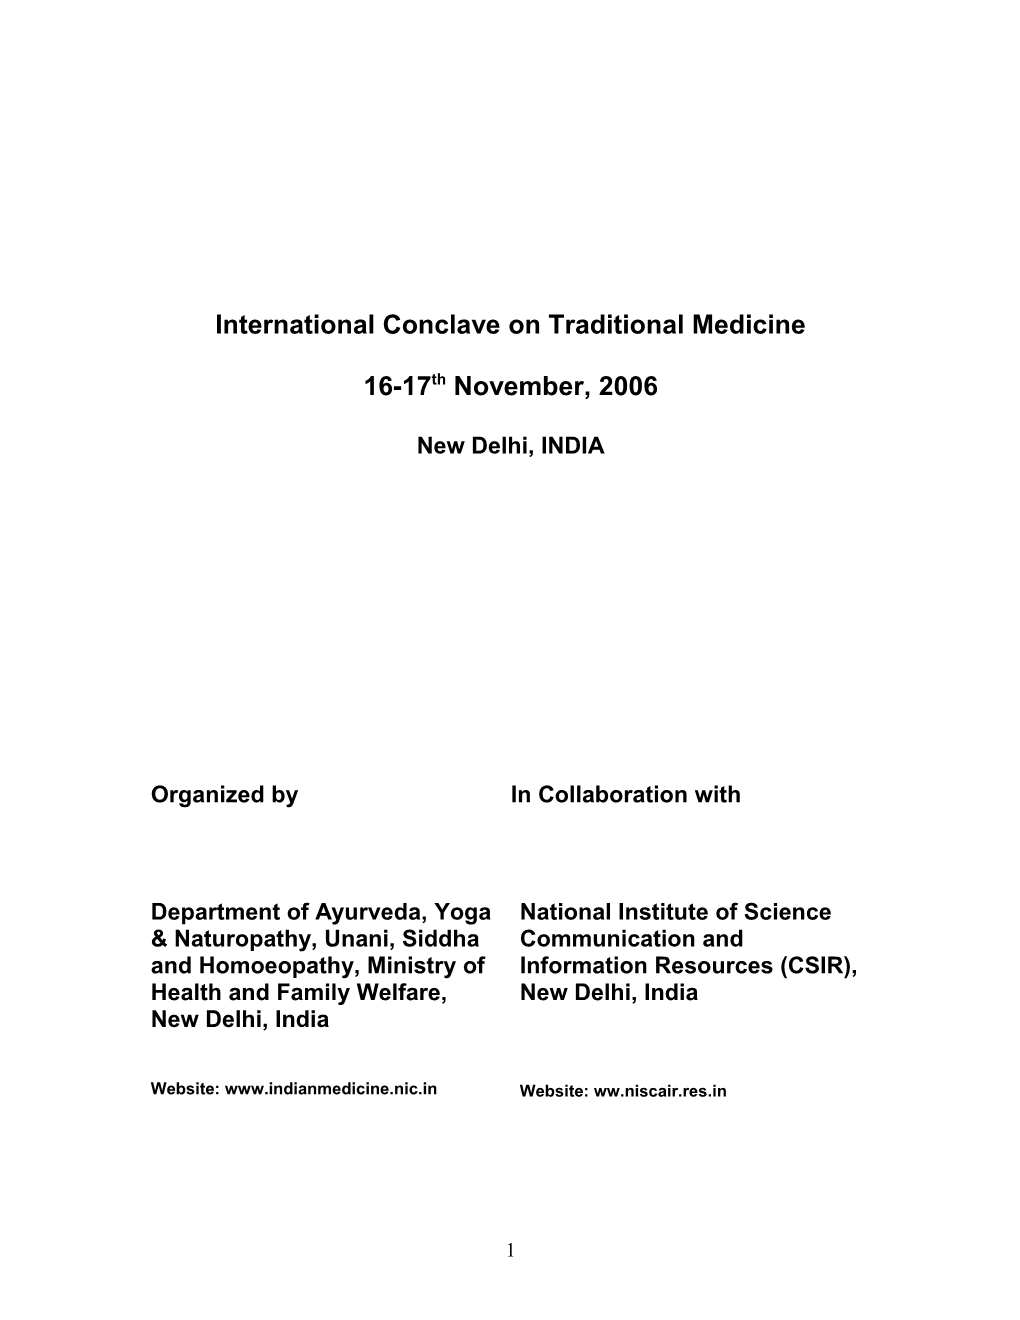 Traditional Medicines: Current Developments and Issues That Need Addressal